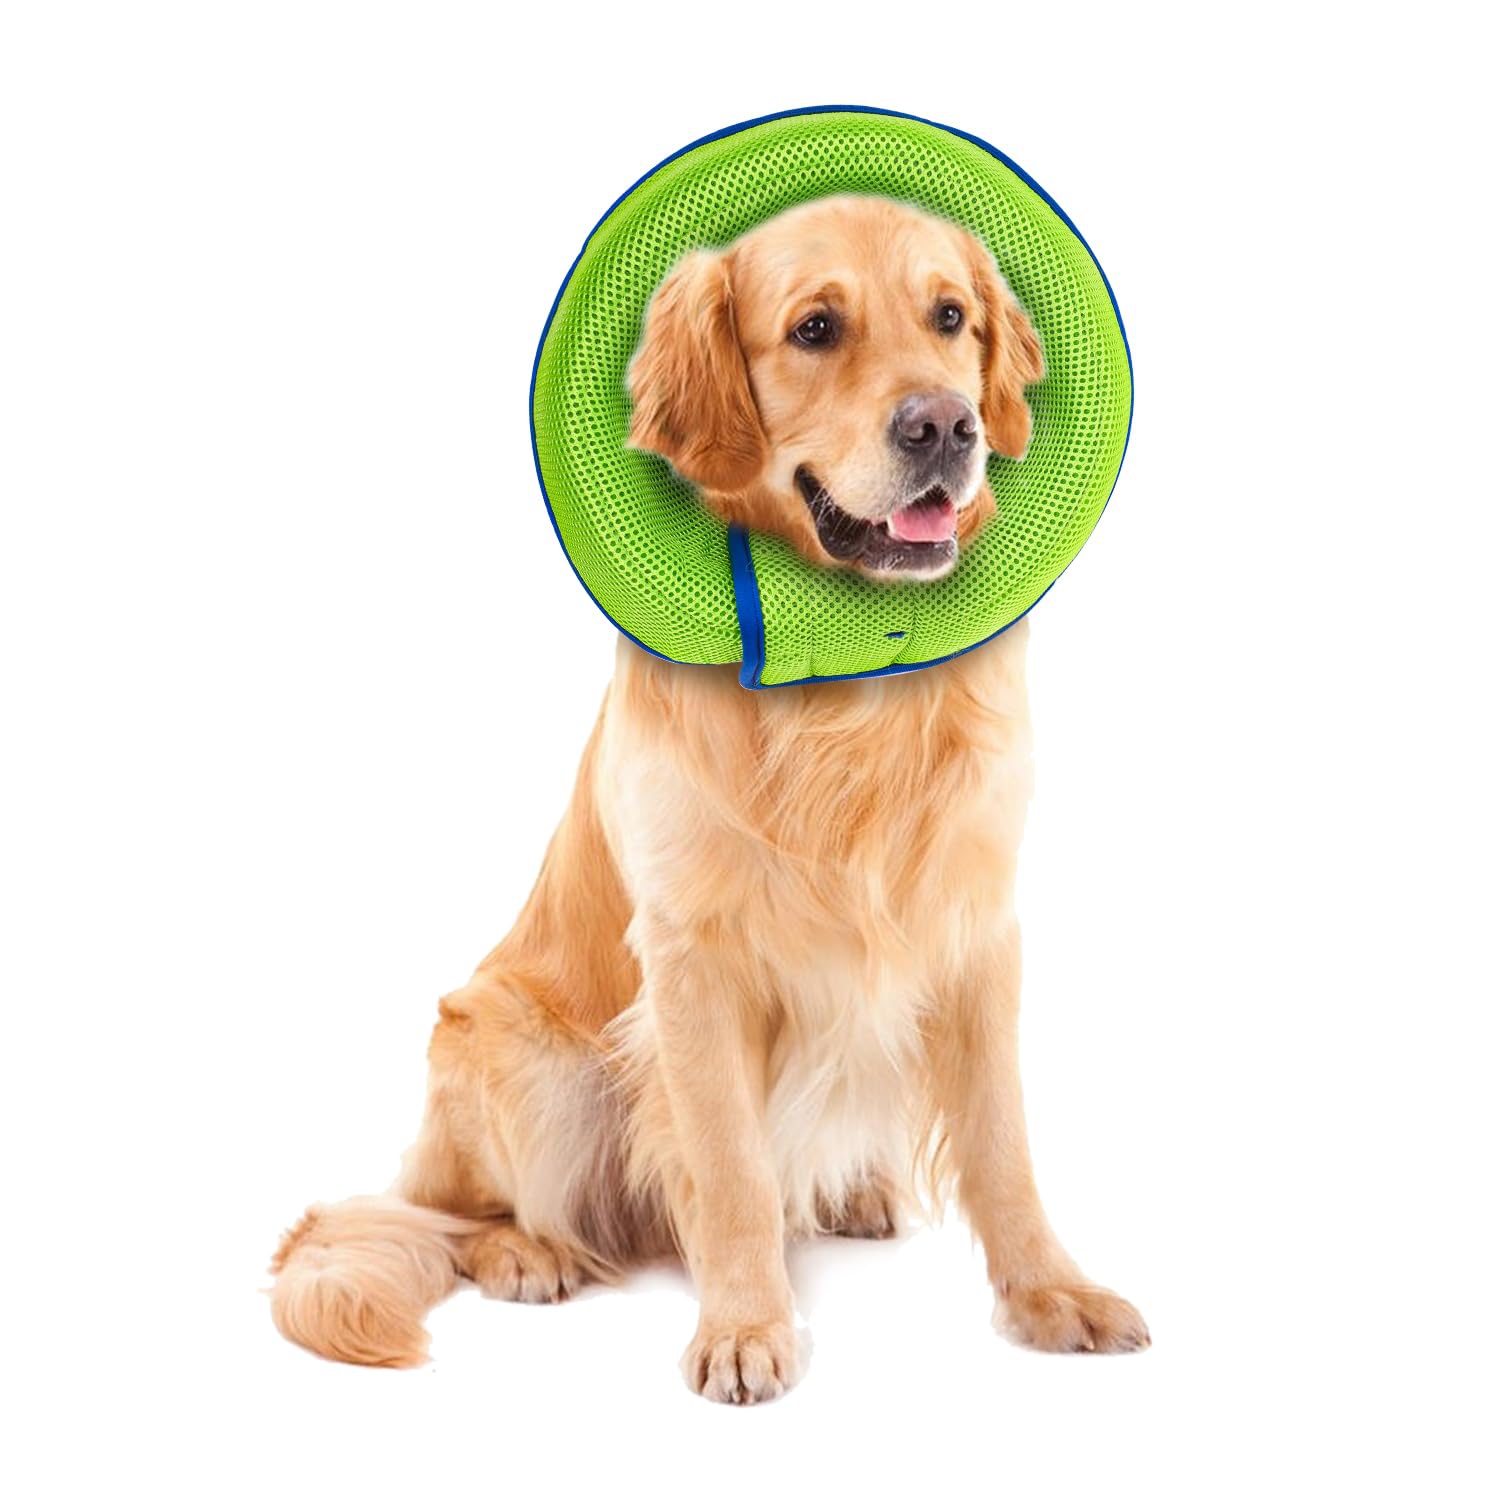 Soft Recovery Cone for Dogs After Surgery - Prevents Wound Touching -  Suitable for Small, Medium & Large Breeds - Pet Surgery Collar for Dogs -  XL Size Available.